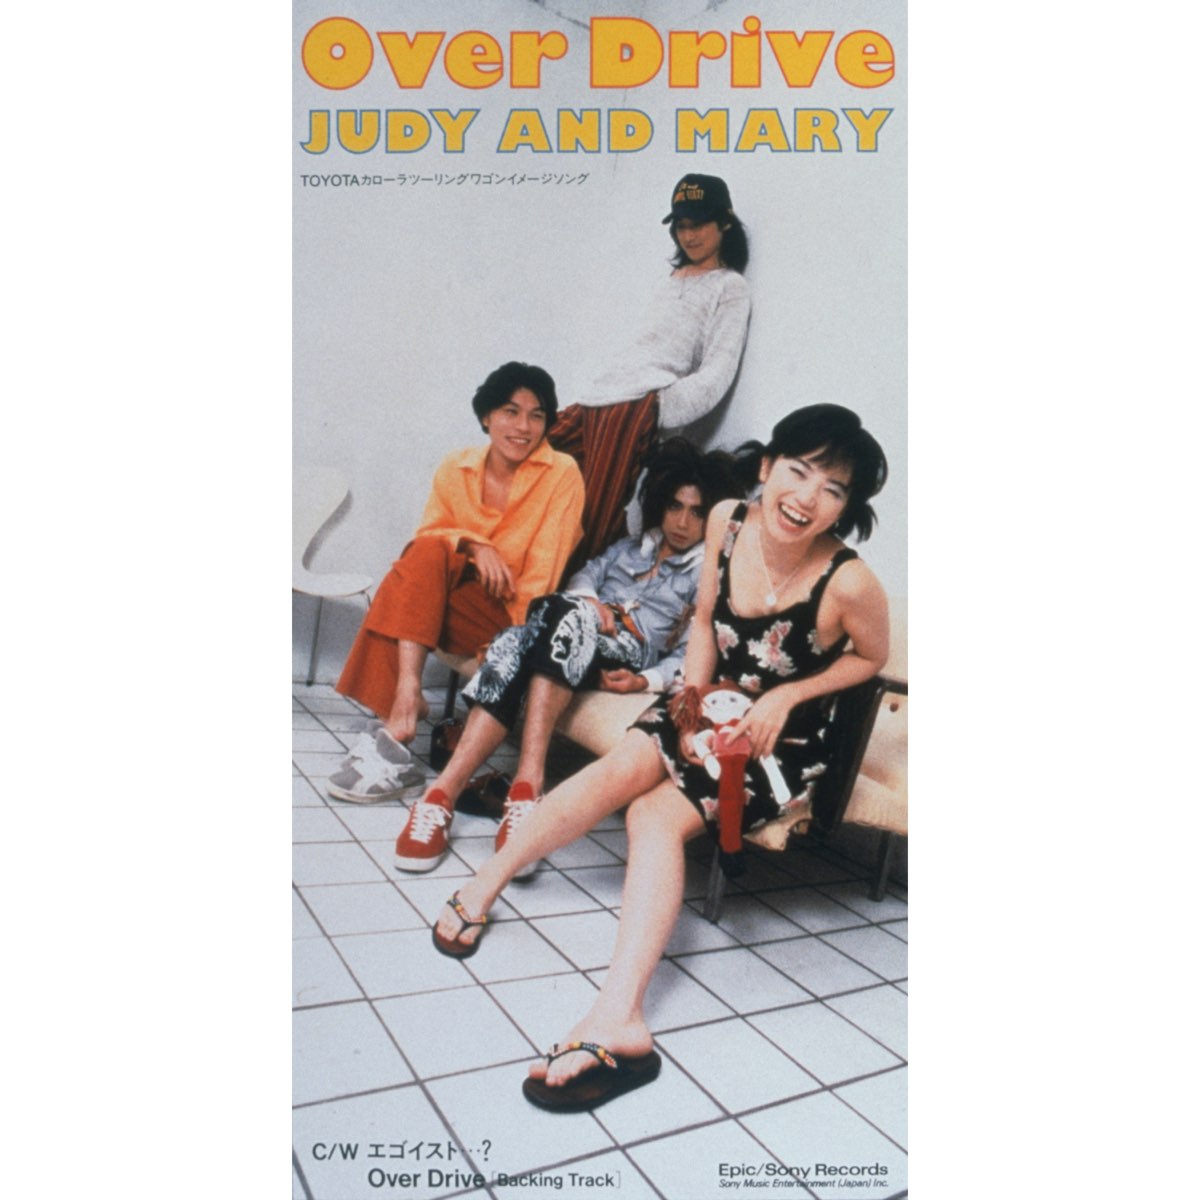 Over Drive Single By Judy And Mary On Apple Music